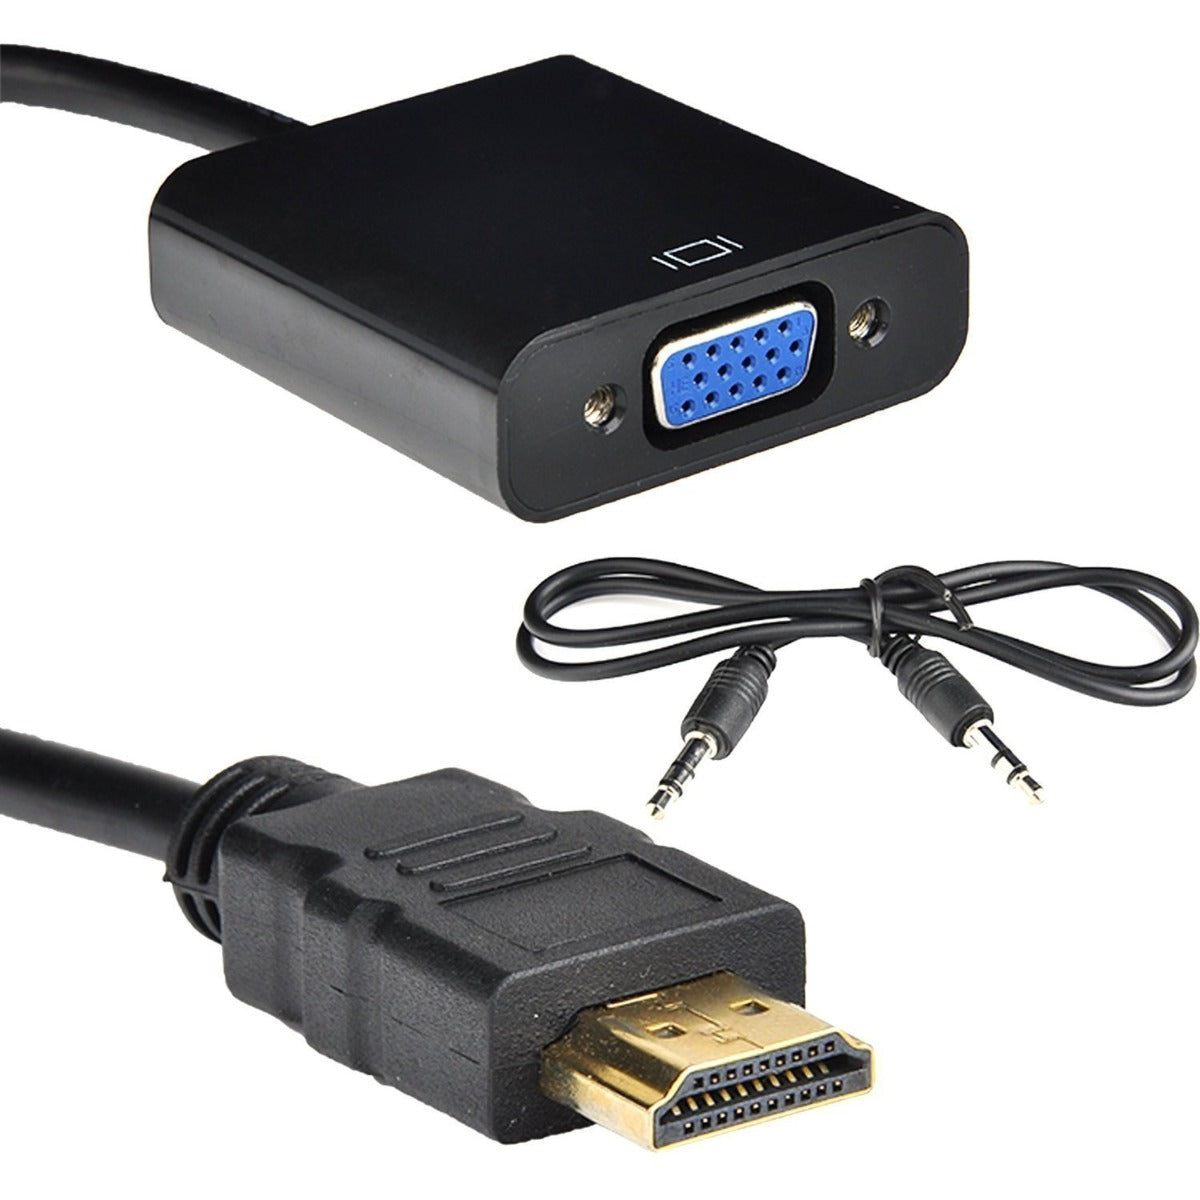 Buy HDMI to VGA Adapter with Audio - Black Online in India